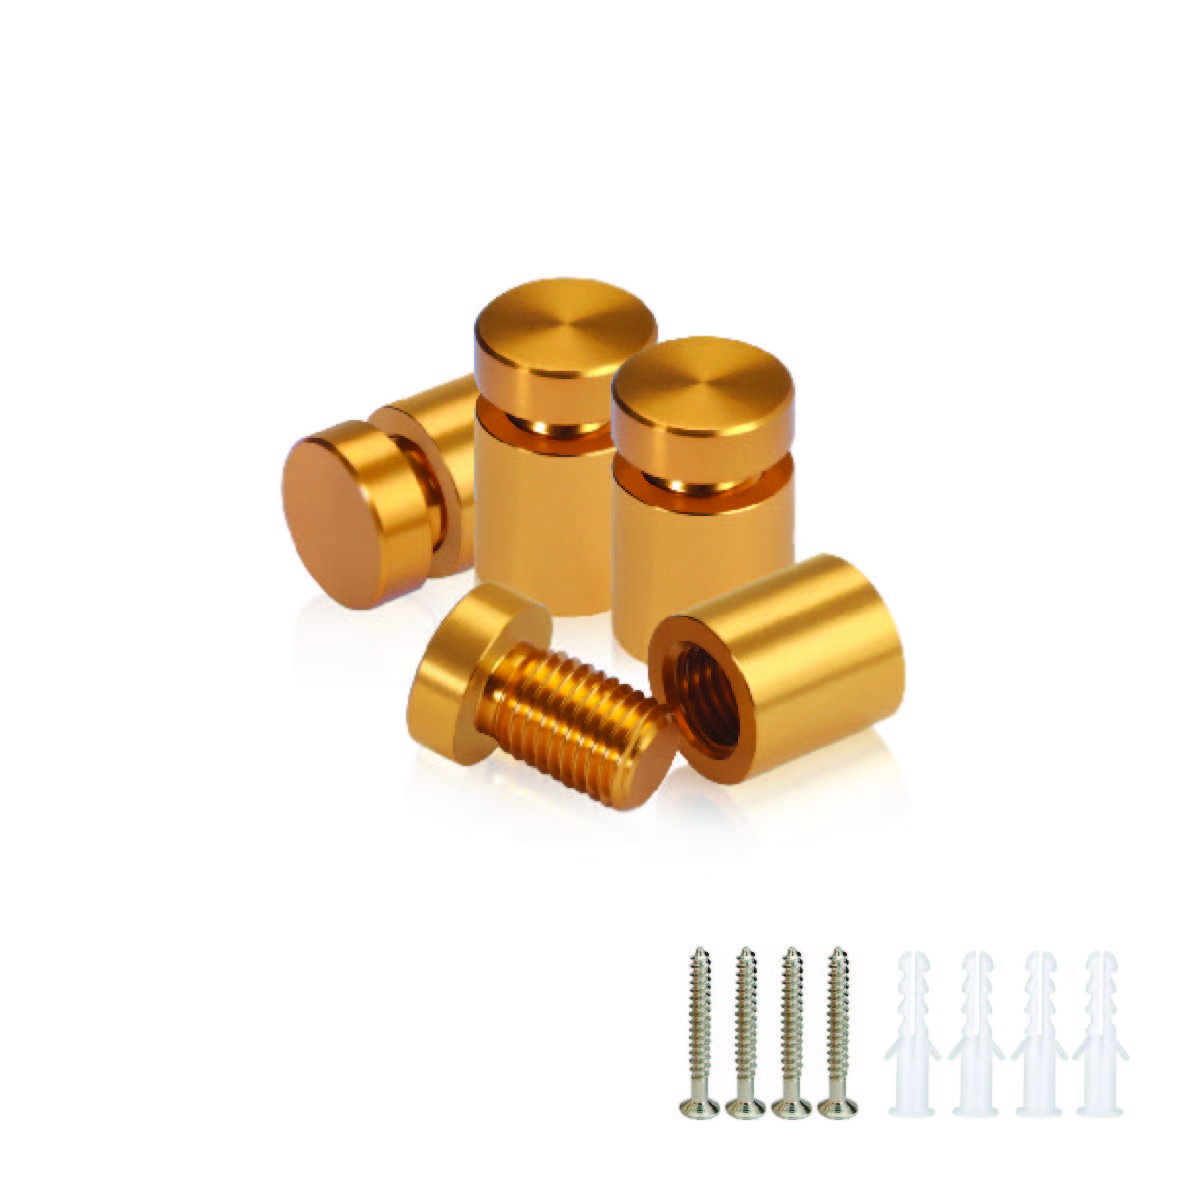 (Set of 4) 1/2'' Diameter X 1/2'' Barrel Length, Affordable Aluminum Standoffs, Gold Anodized Finish Standoff and (4) 2208Z Screw and (4) LANC1 Anchor for concrete/drywall (For Inside/Outside) [Required Material Hole Size: 3/8'']